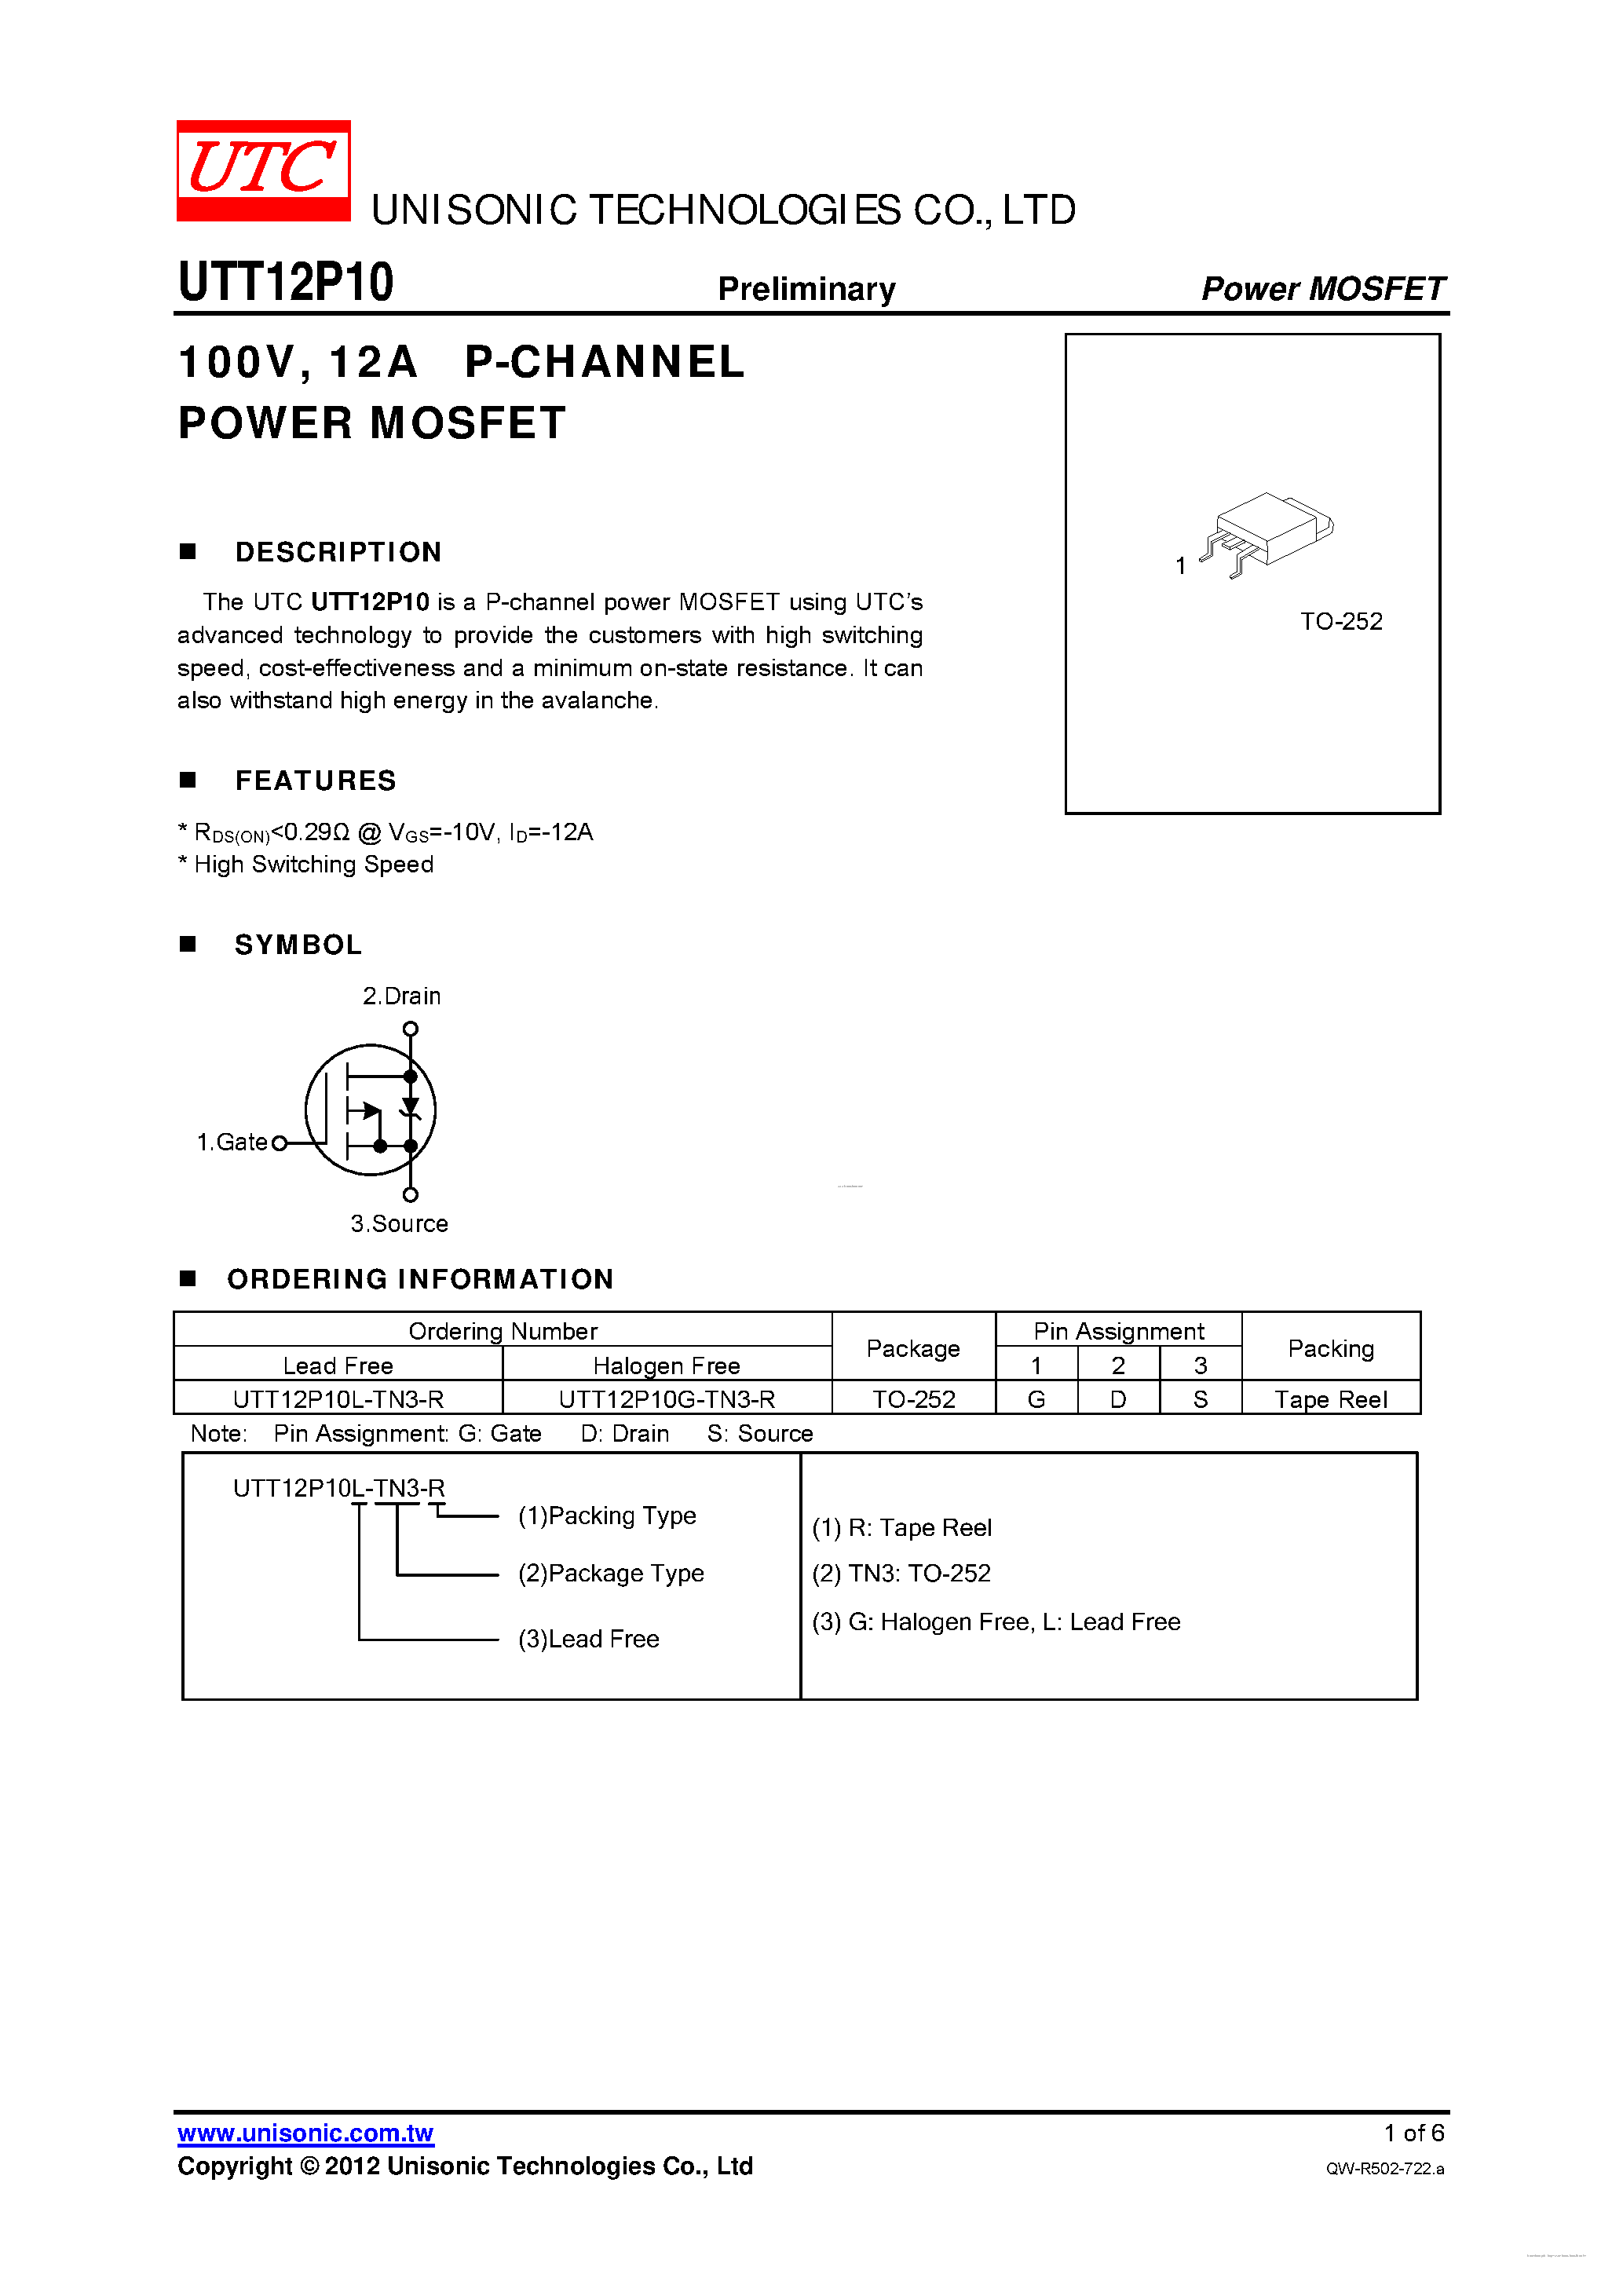 Datasheet UTT12P10 - P-CHANNEL POWER MOSFET page 1